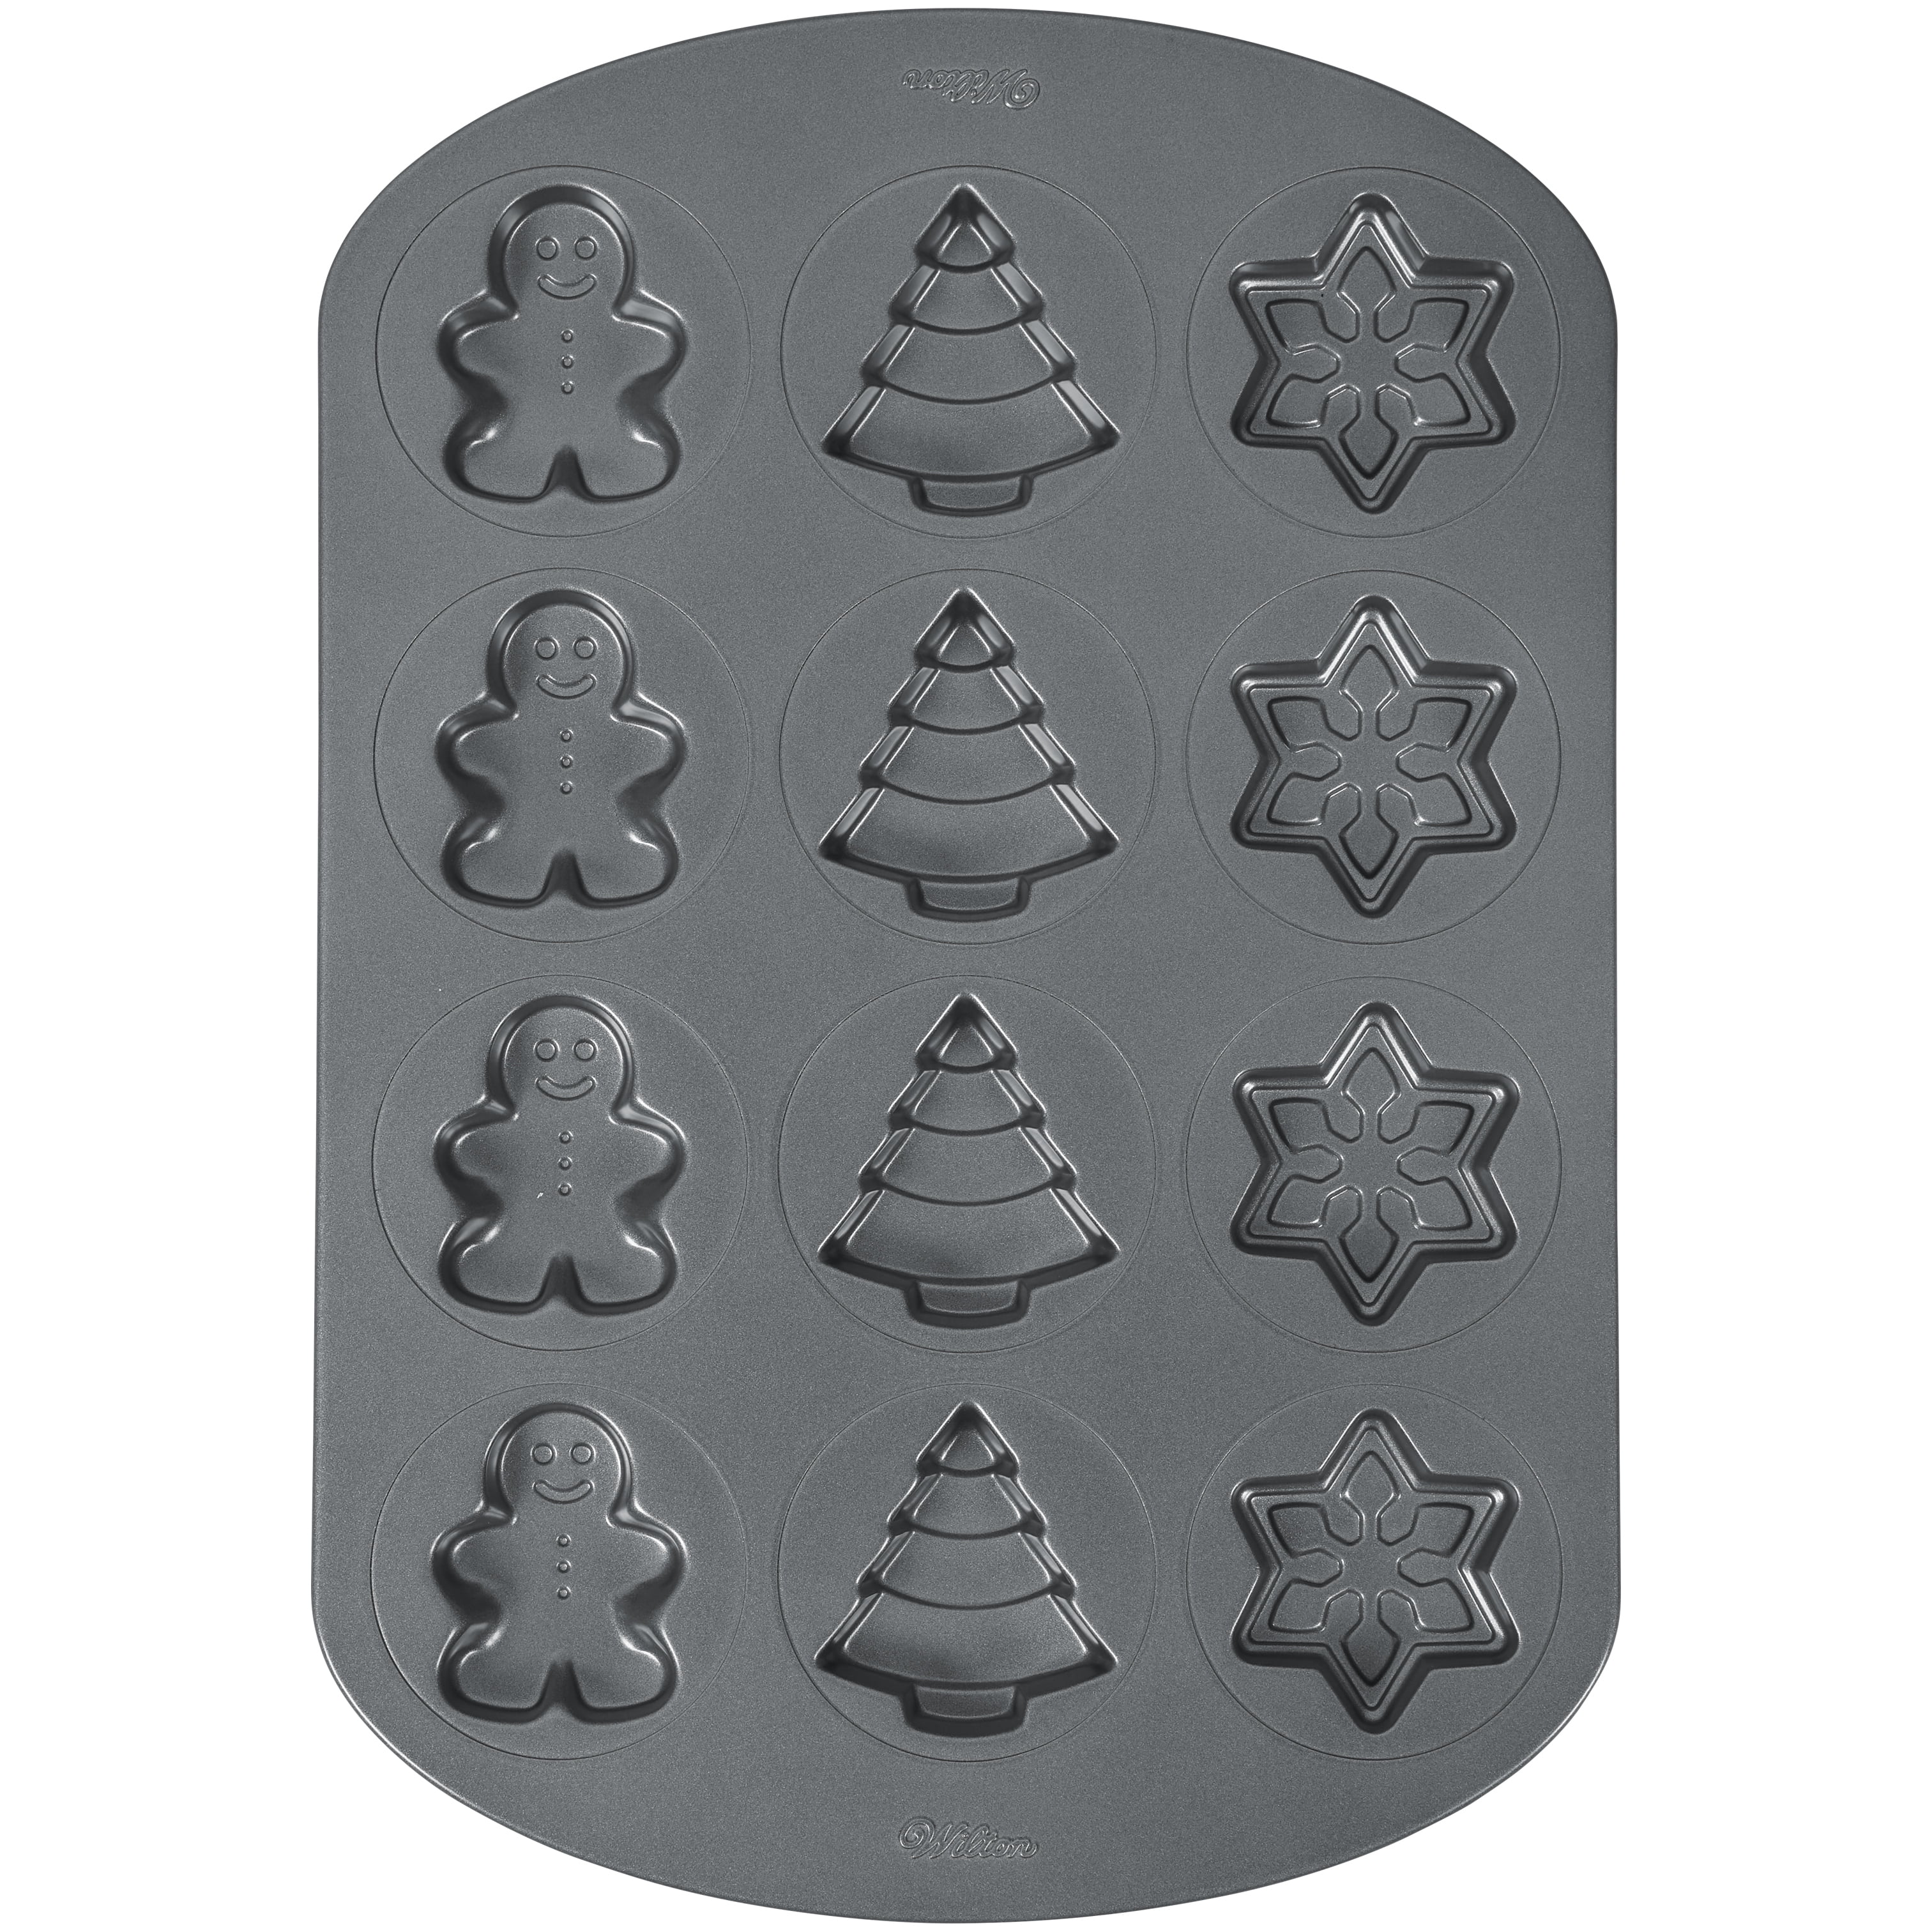 Wilton Treats Made Simple Holiday Shapes Cookie Pan, 12-Cavity 